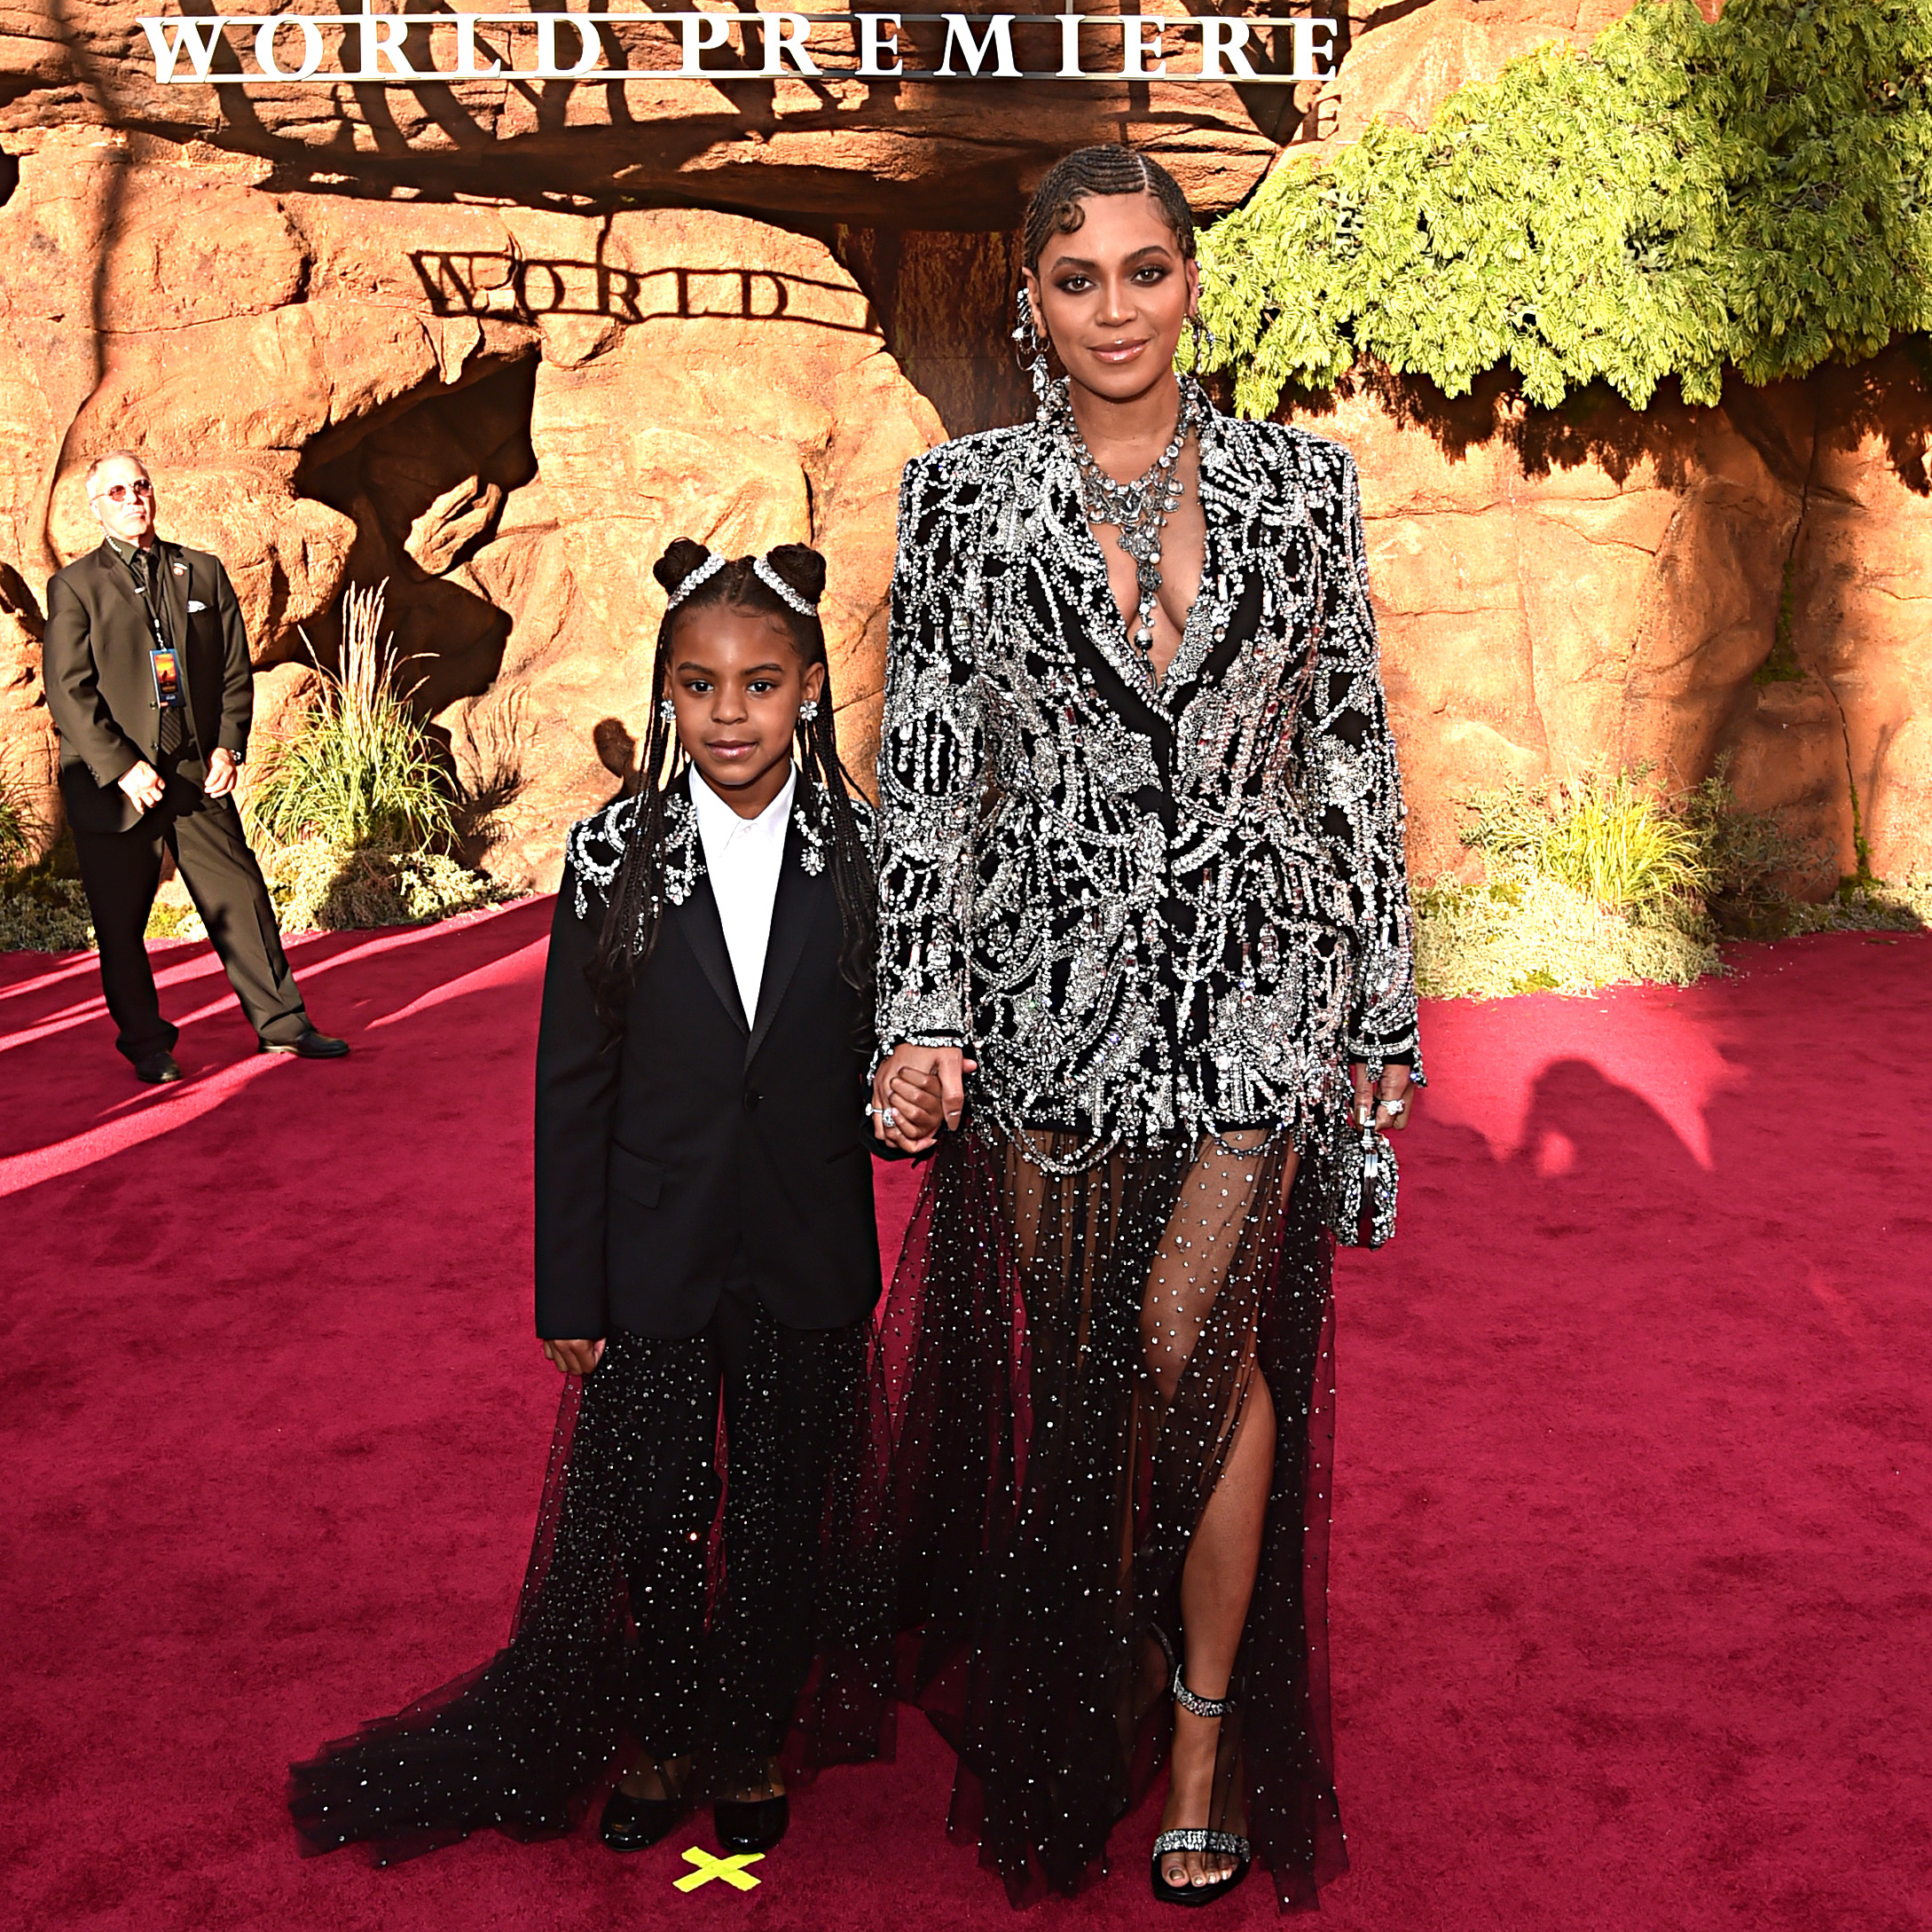 Beyoncé and Blue Ivy holding hands on the red carpet